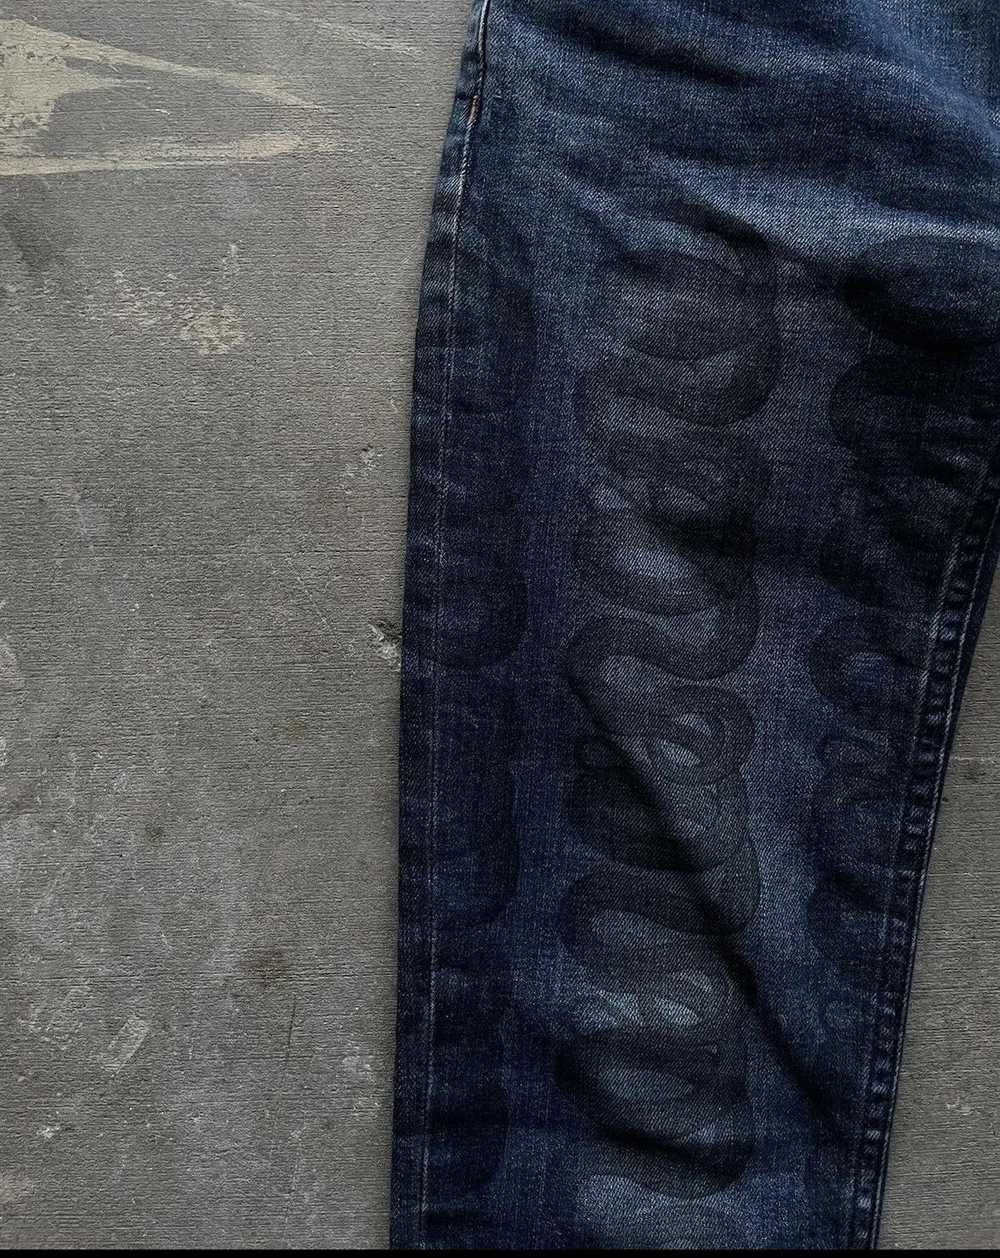 Hysteric Glamour hysteric glamour snake denim - image 2